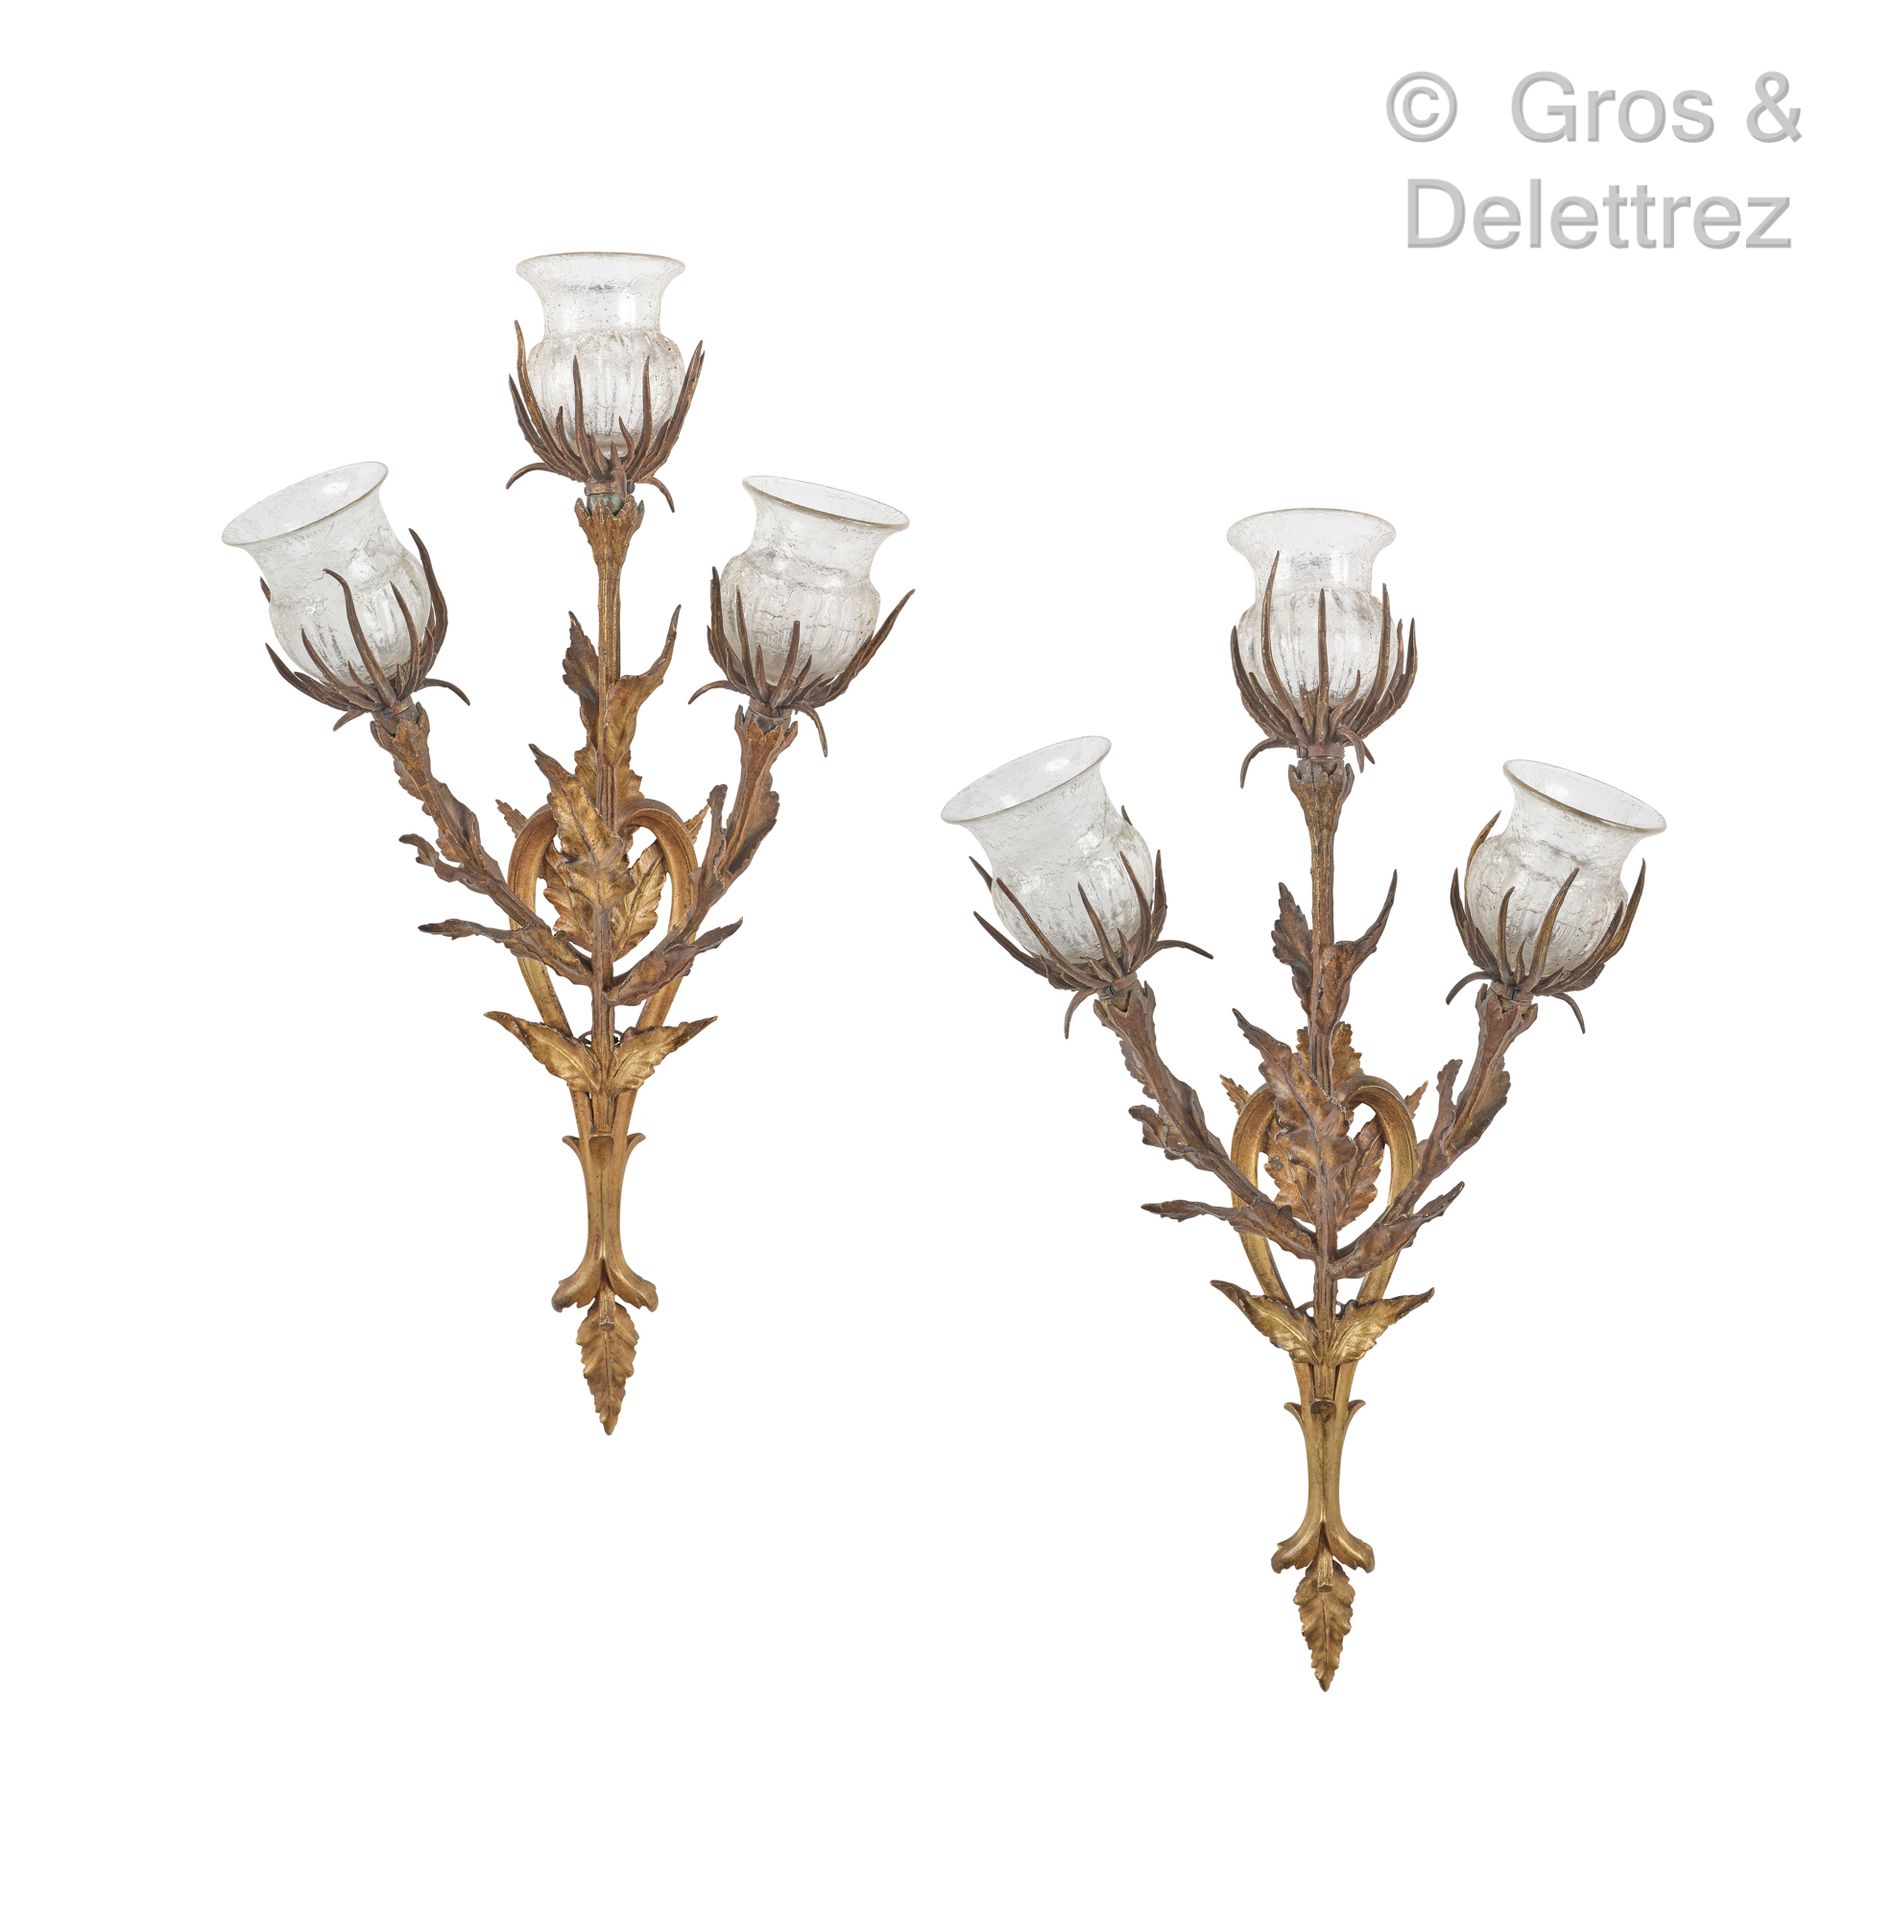 Maurice BOUVAL (1863-1916) 
Pair of sconces in bronze with gilded patina present&hellip;